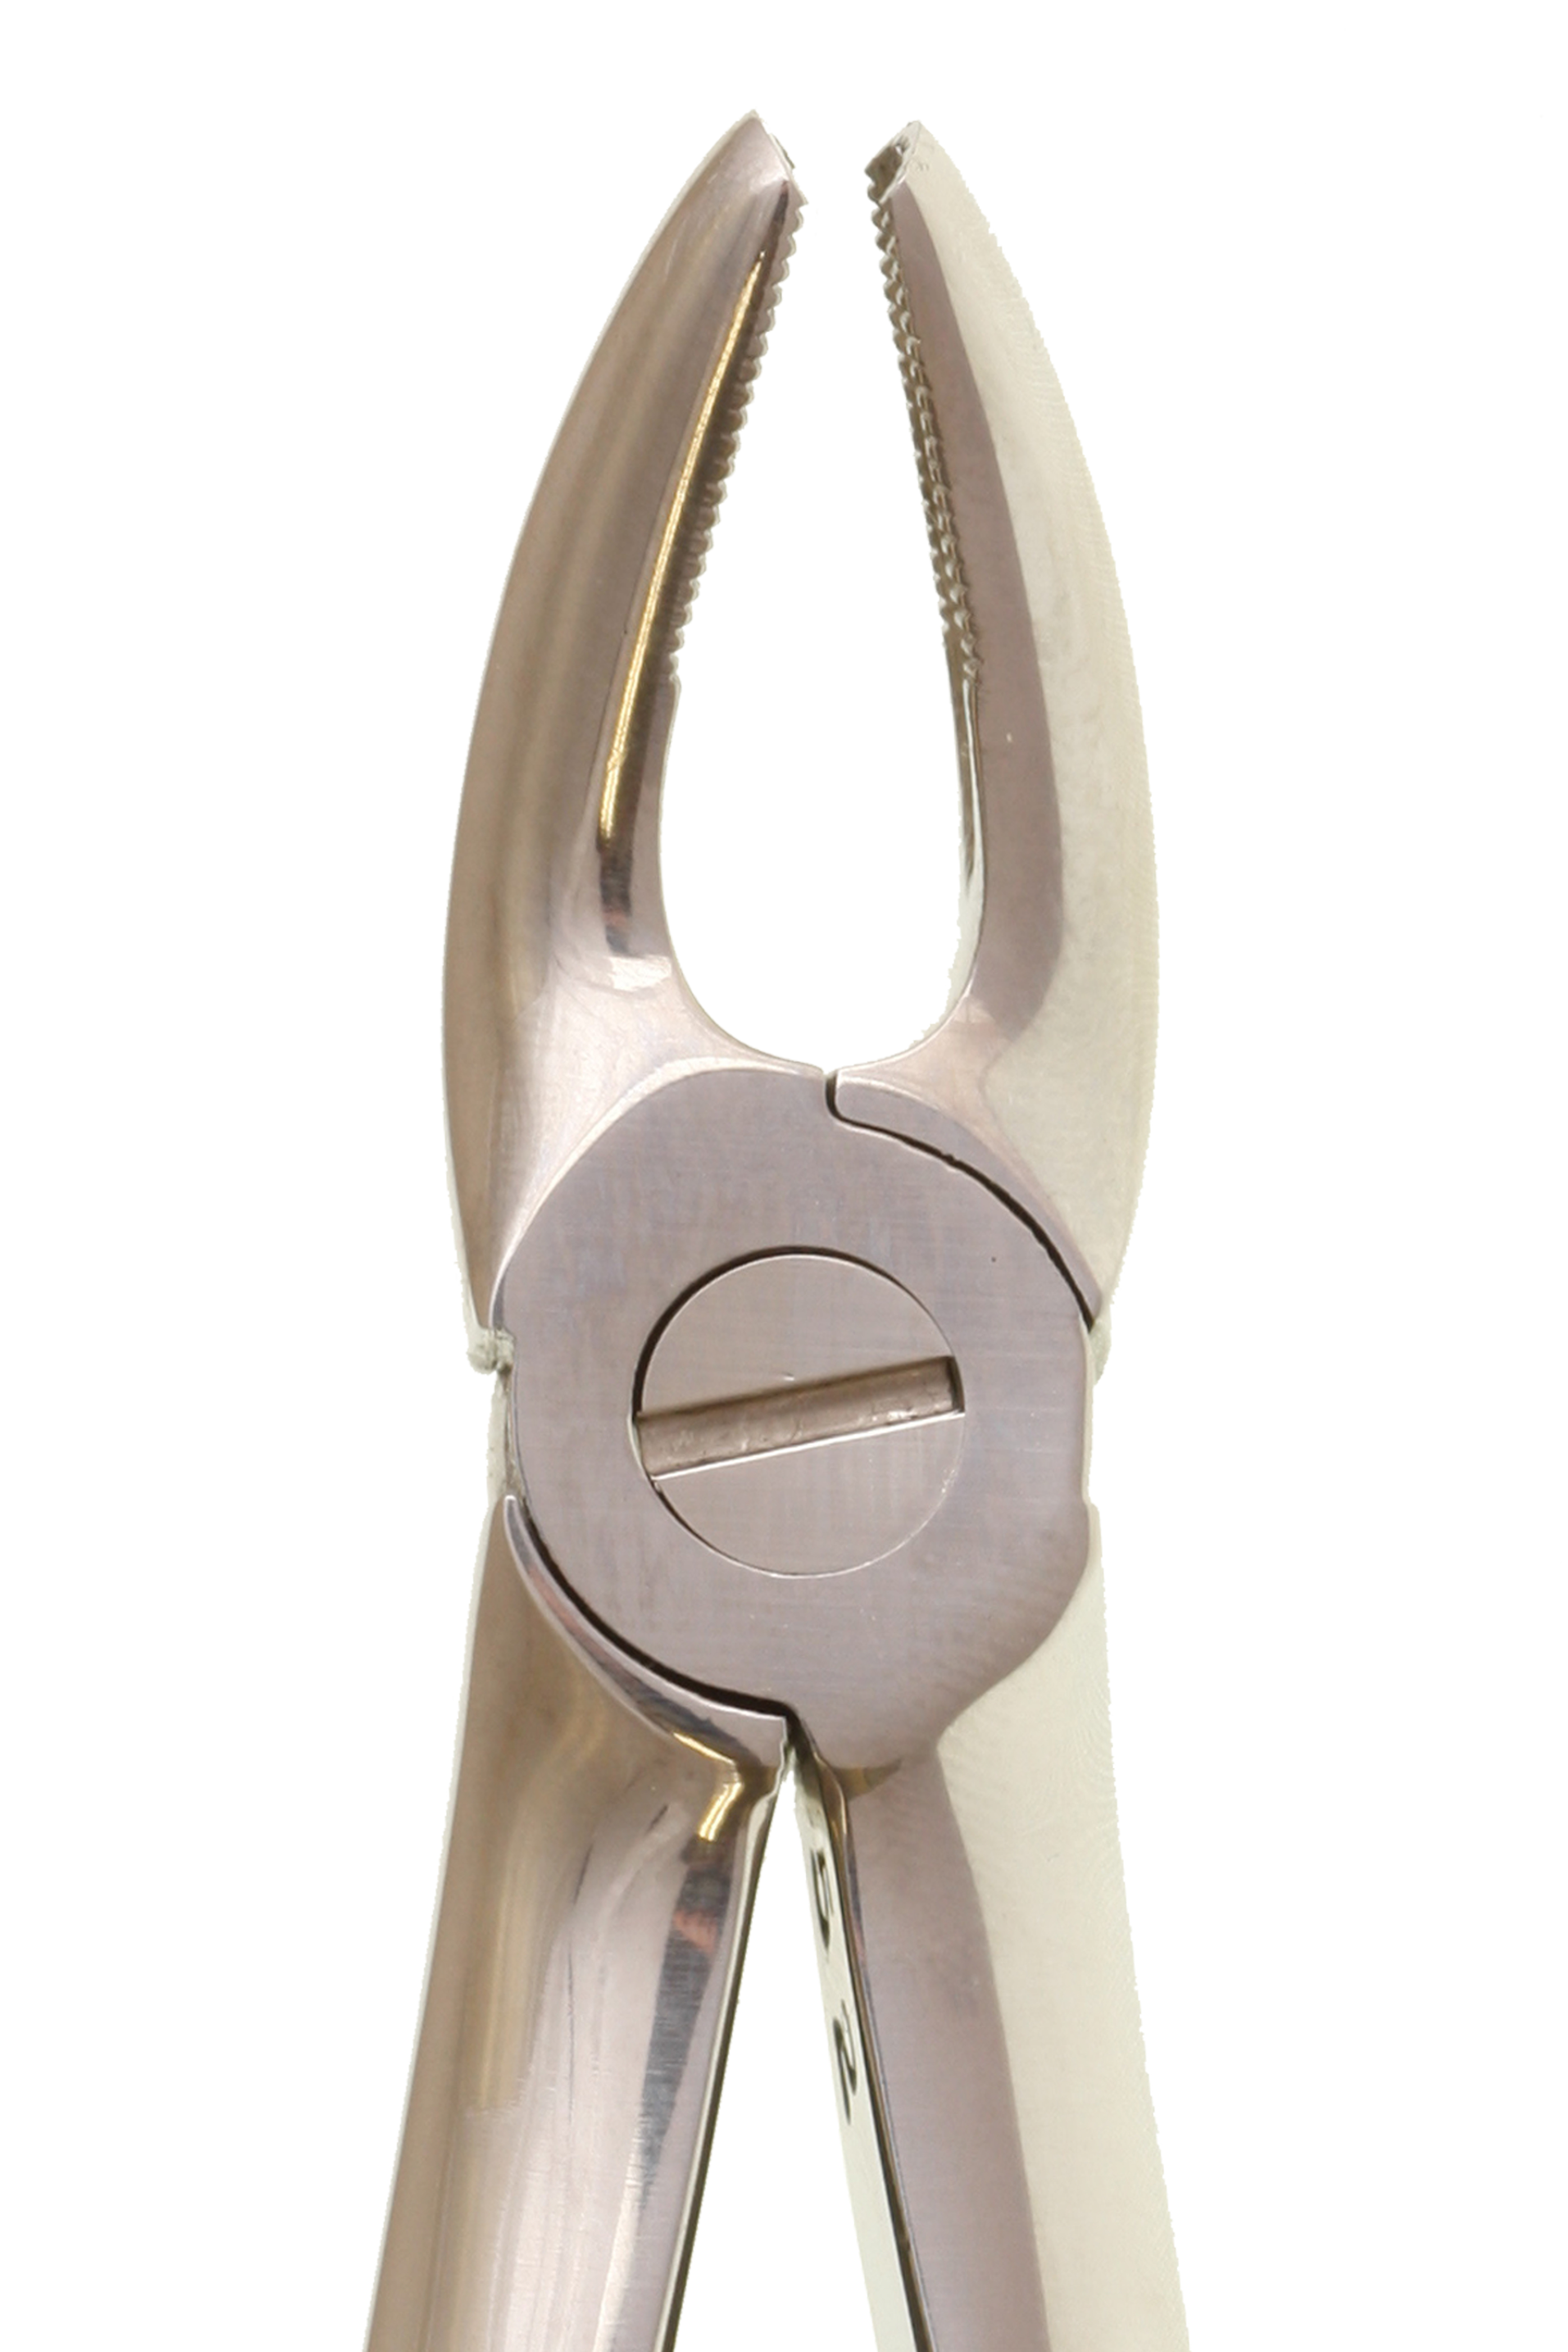 Eco+ Extraction Forceps No 7